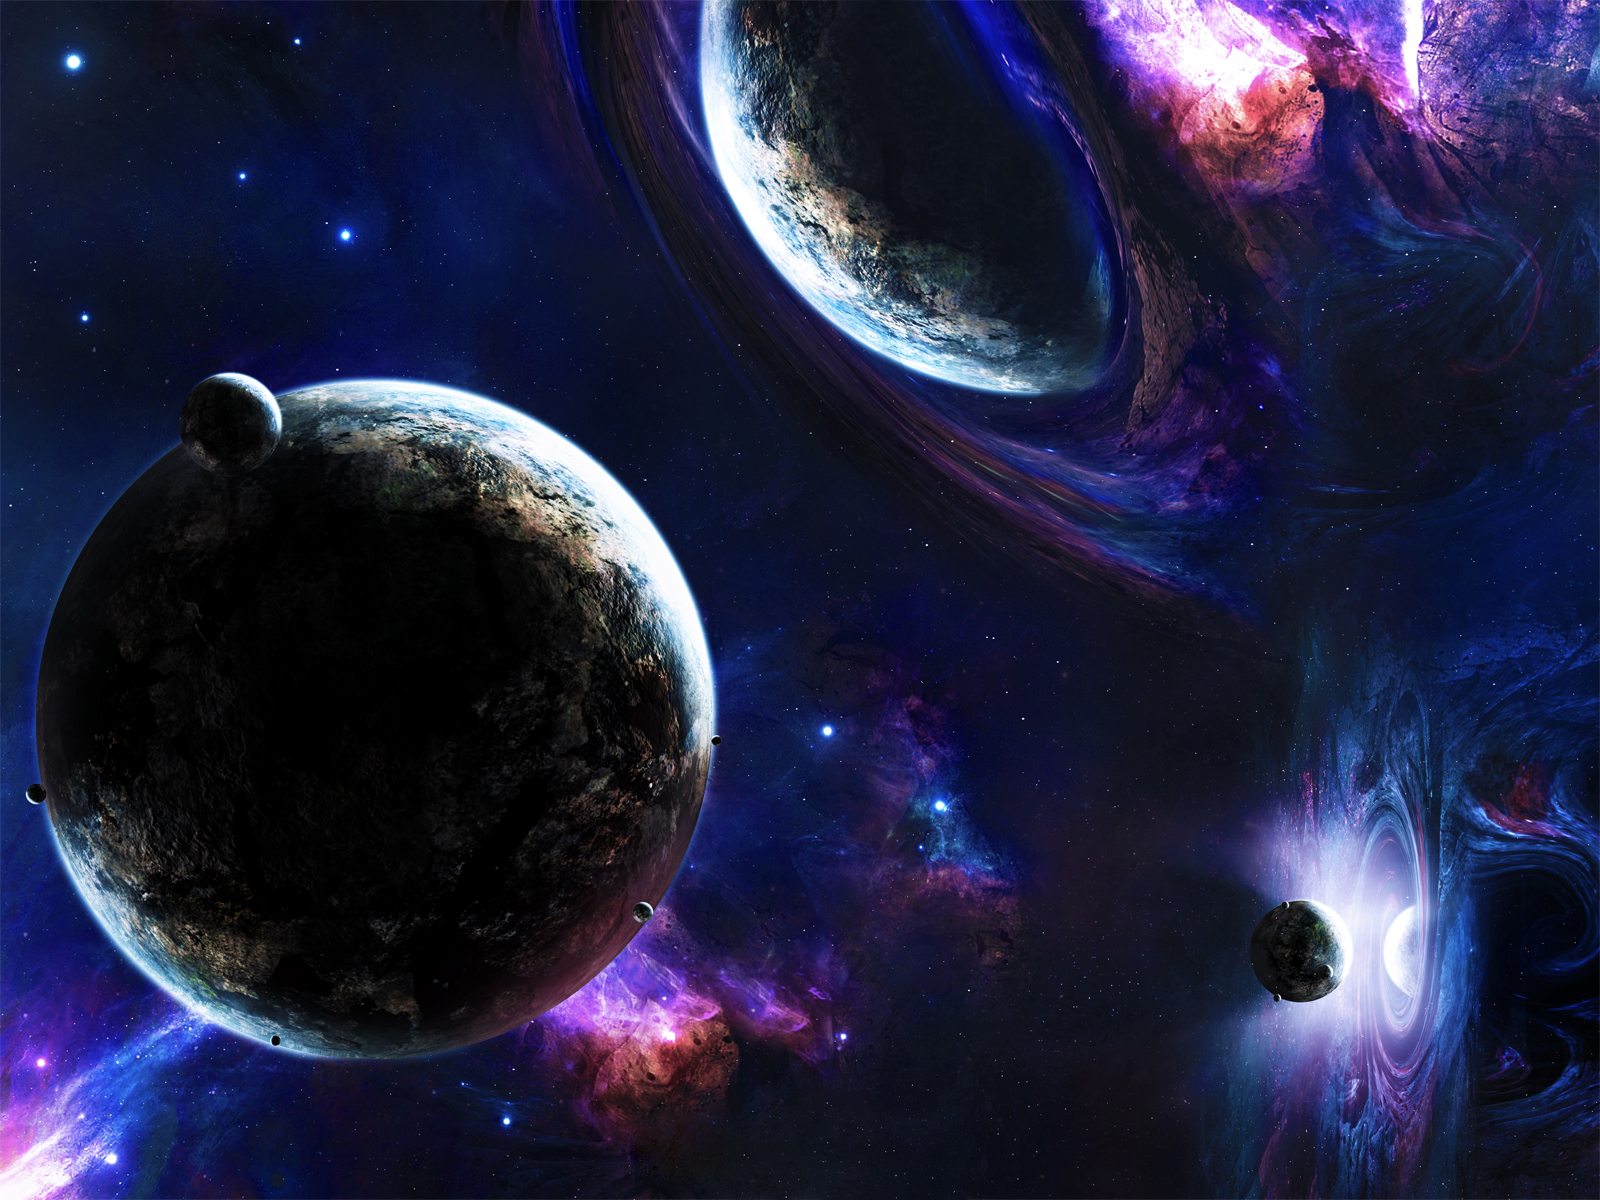 star, sci fi, planets, black hole, moon, planet, space